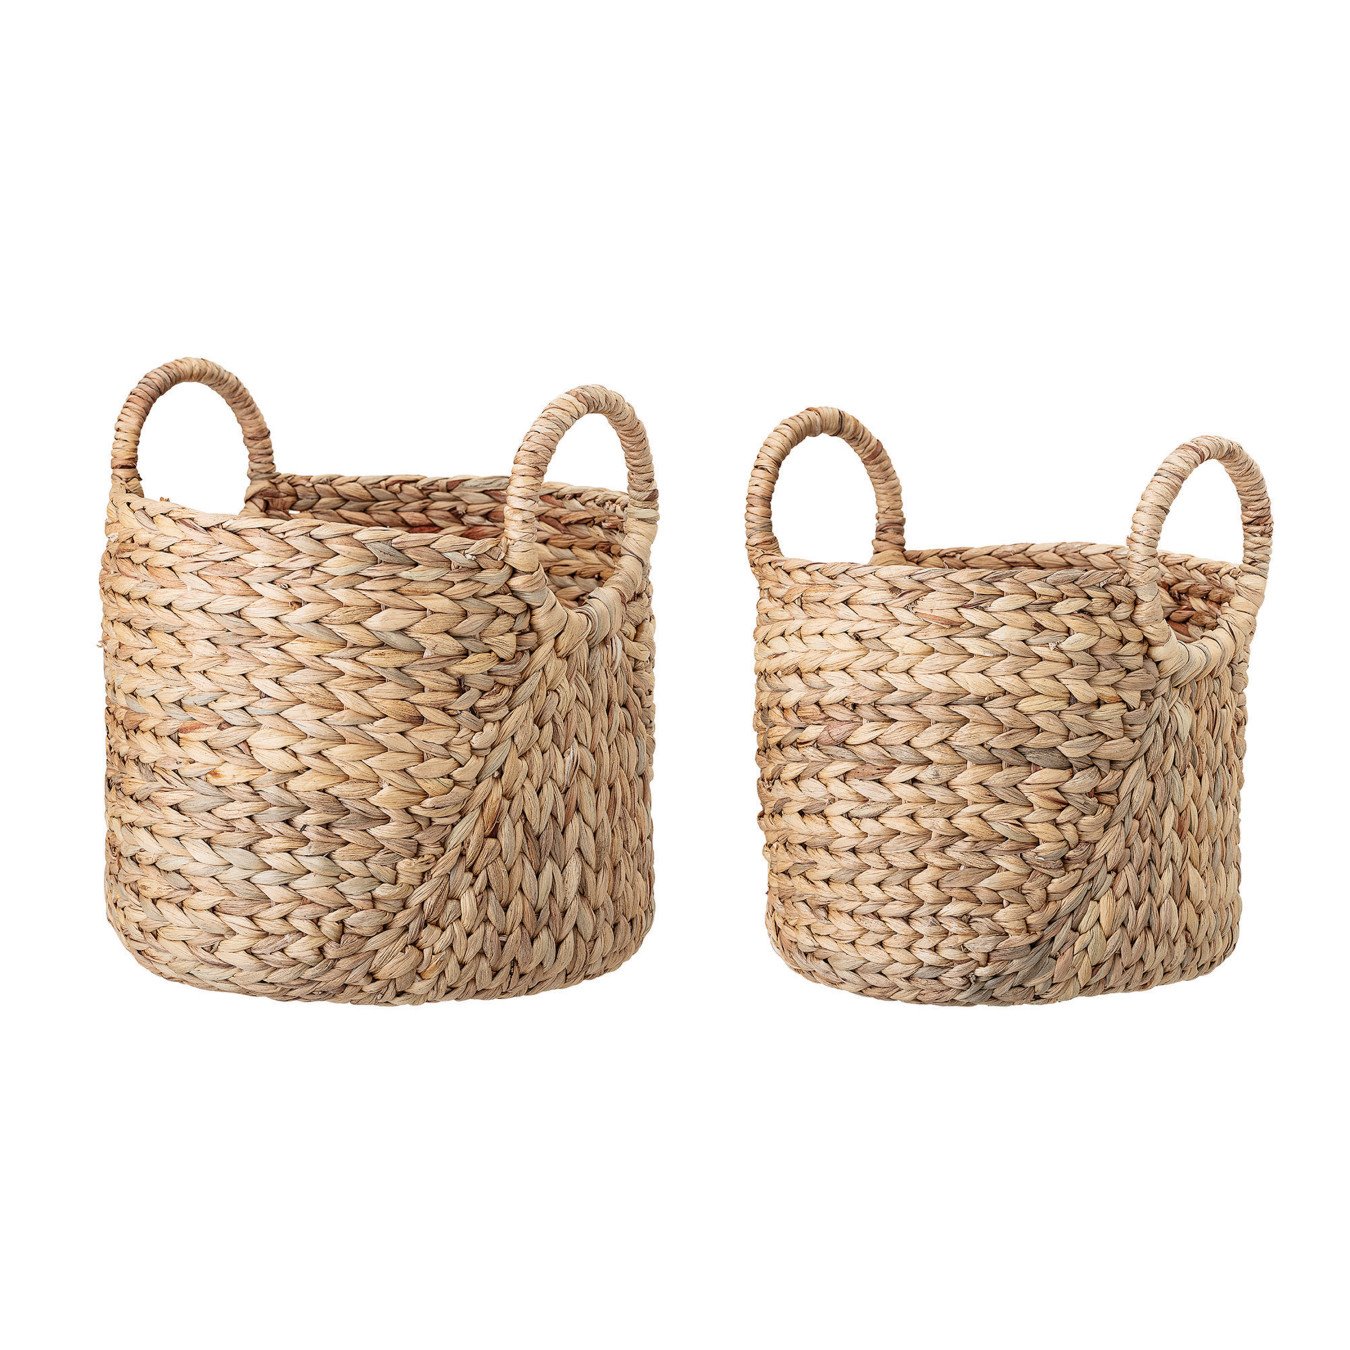 Handwoven Beige Seagrass Baskets with Round Handles (Set of 2 Sizes)